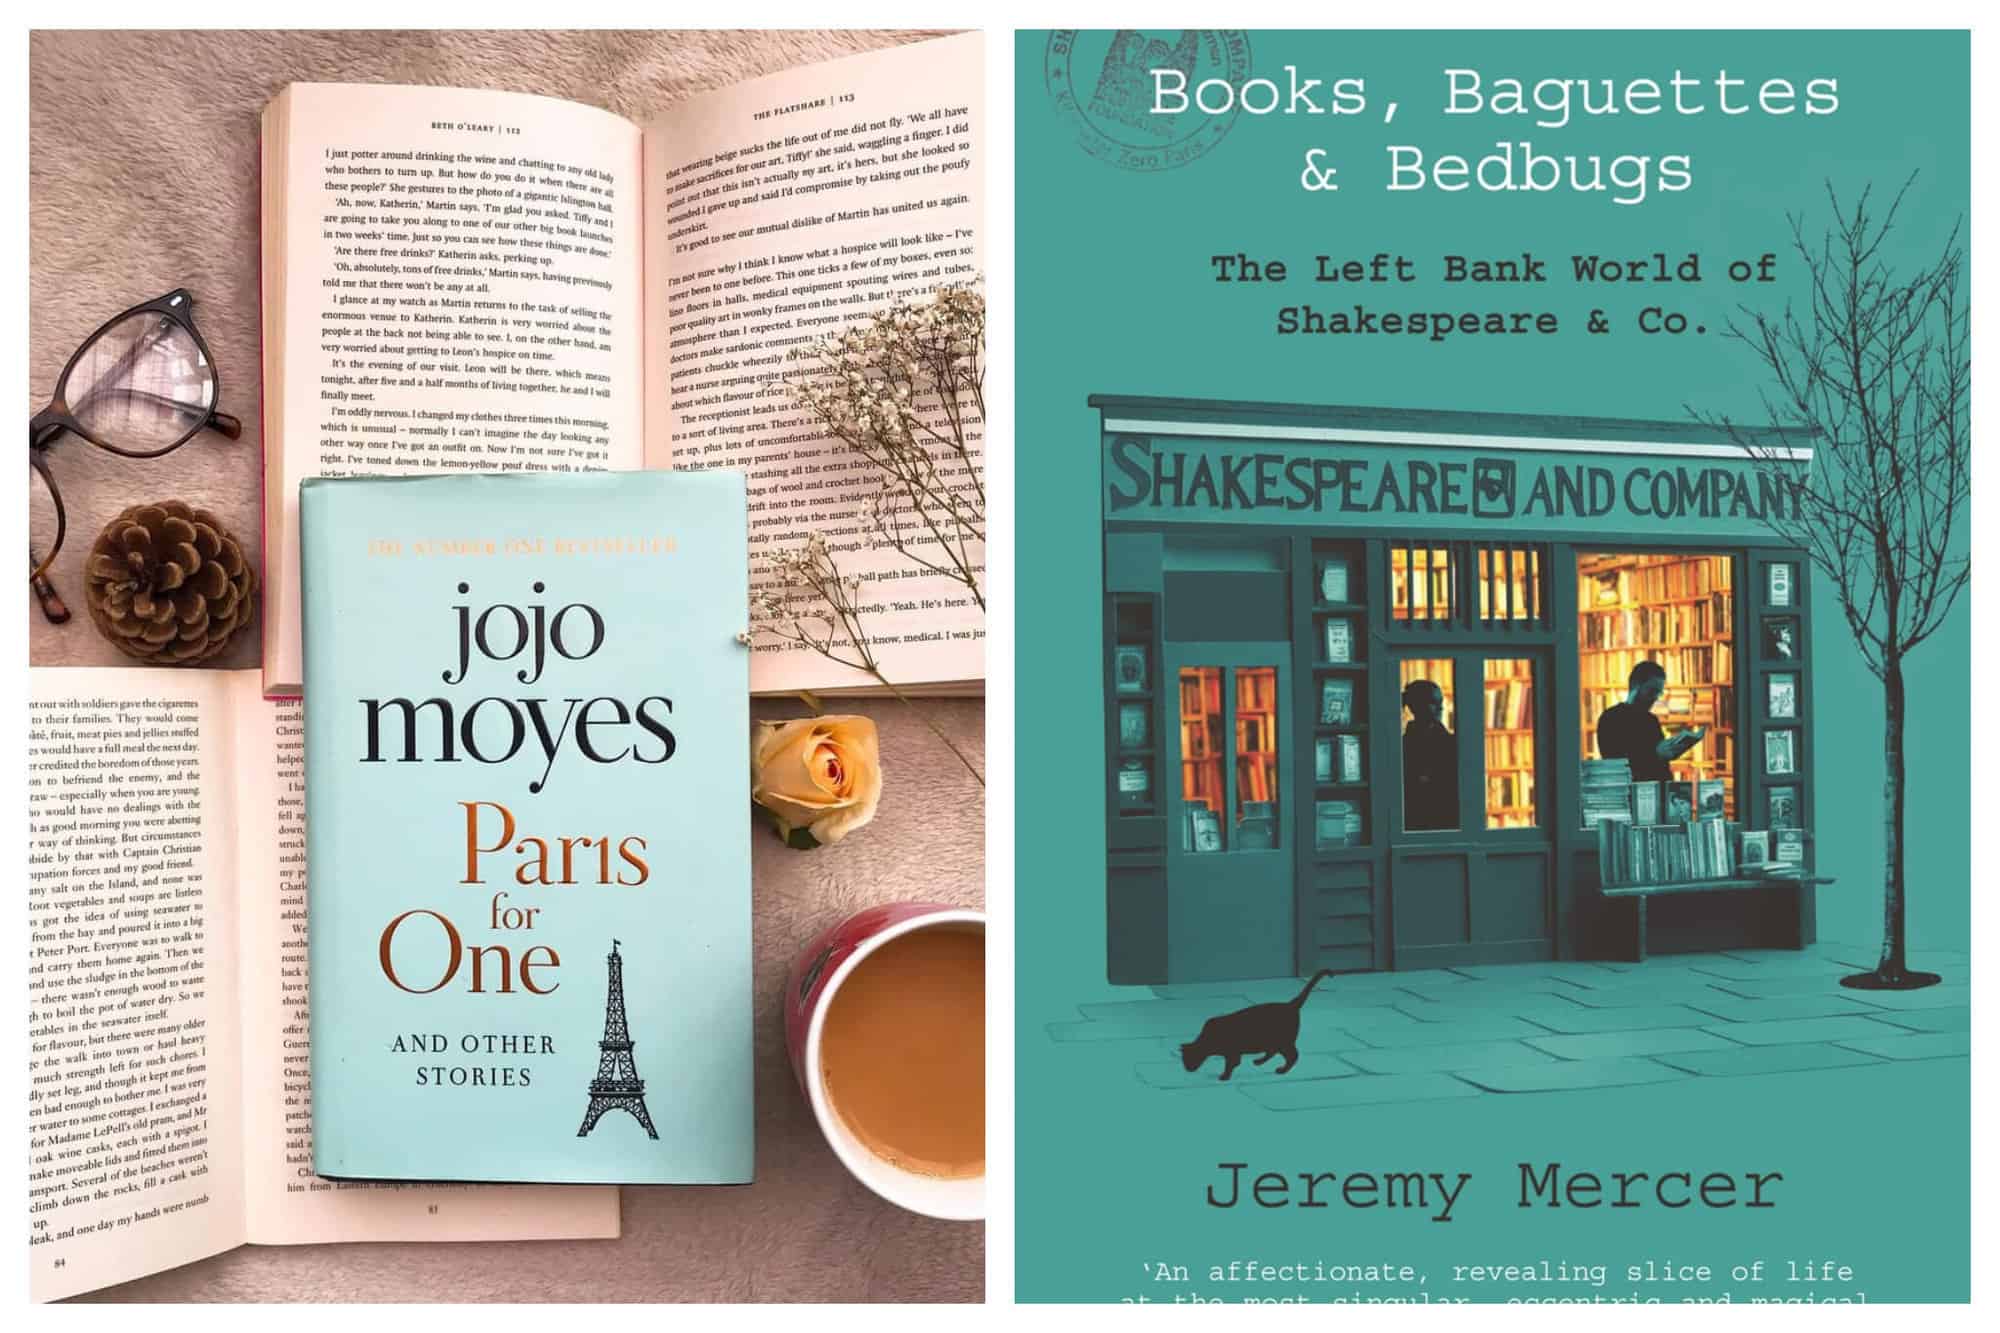 Left: an aerial view of the book "Paris for One" by Jojo Moyes. The cover is light blue and the title is written in gold. The author's name is written in black. The book is on top of two other open books, and there is a cup of coffee in the bottom right corner. There is a pair a glasses in the upper left corner as well as a pine cone. Right: the cover of the book "Books, Baguettes, and Bedbugs" by Jeremy Mercer. The cover is teal blue with white lettering and features an illustration of the bookstore Shakespeare and Company.